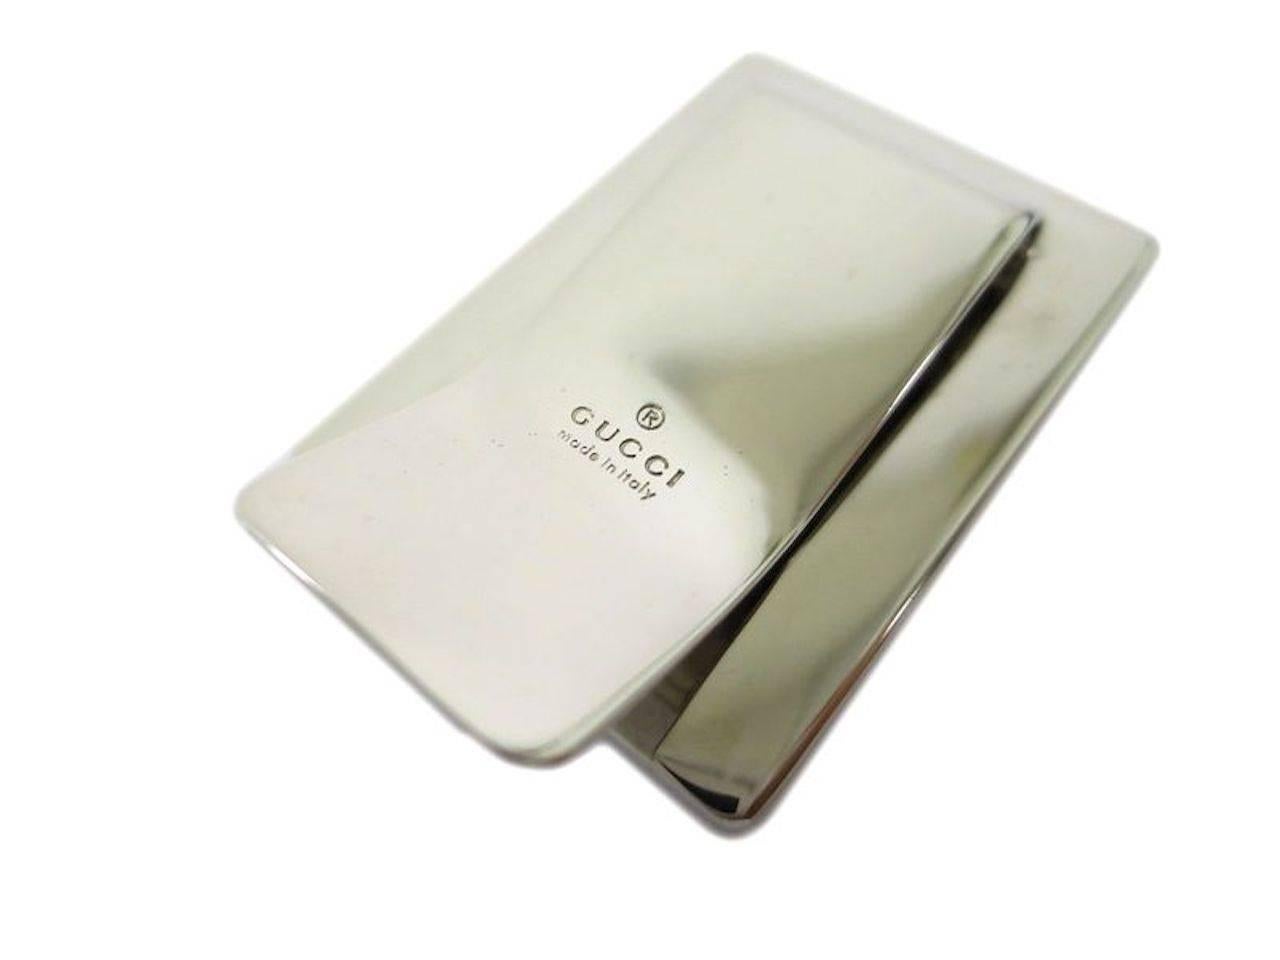 CURATOR'S NOTES

Gucci Reversible Men's Money Clip in Box 

Leather
Metal
Silver tone hardware
Made in Italy
Width 1.5"
Length 2"
Includes original Gucci box